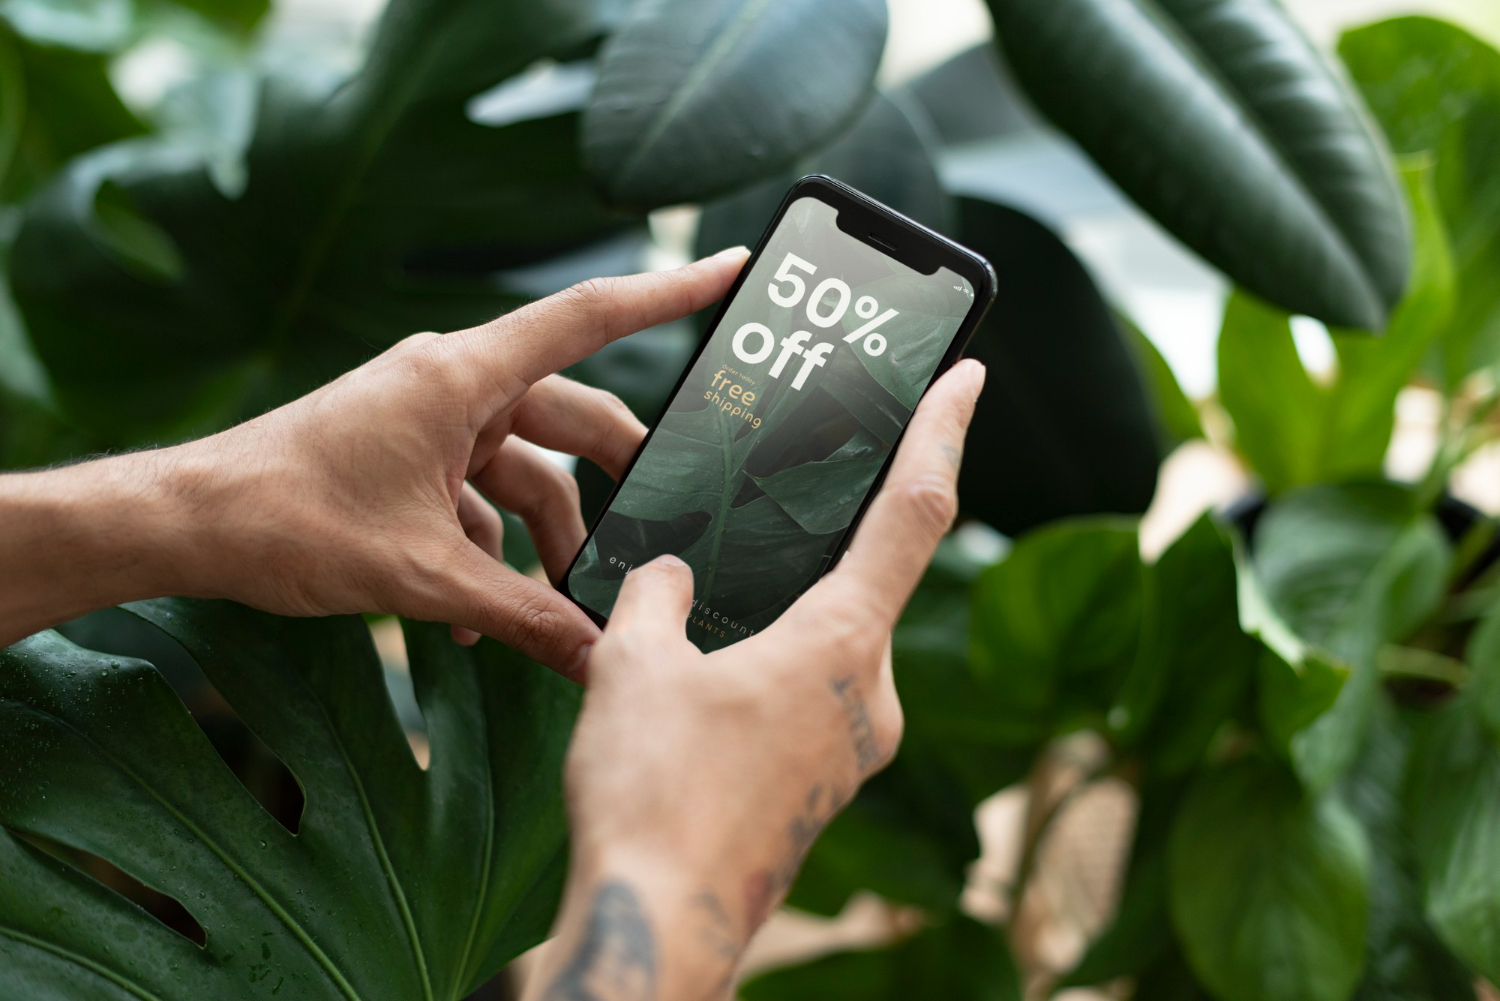 Green app development: how to create an app more sustainably